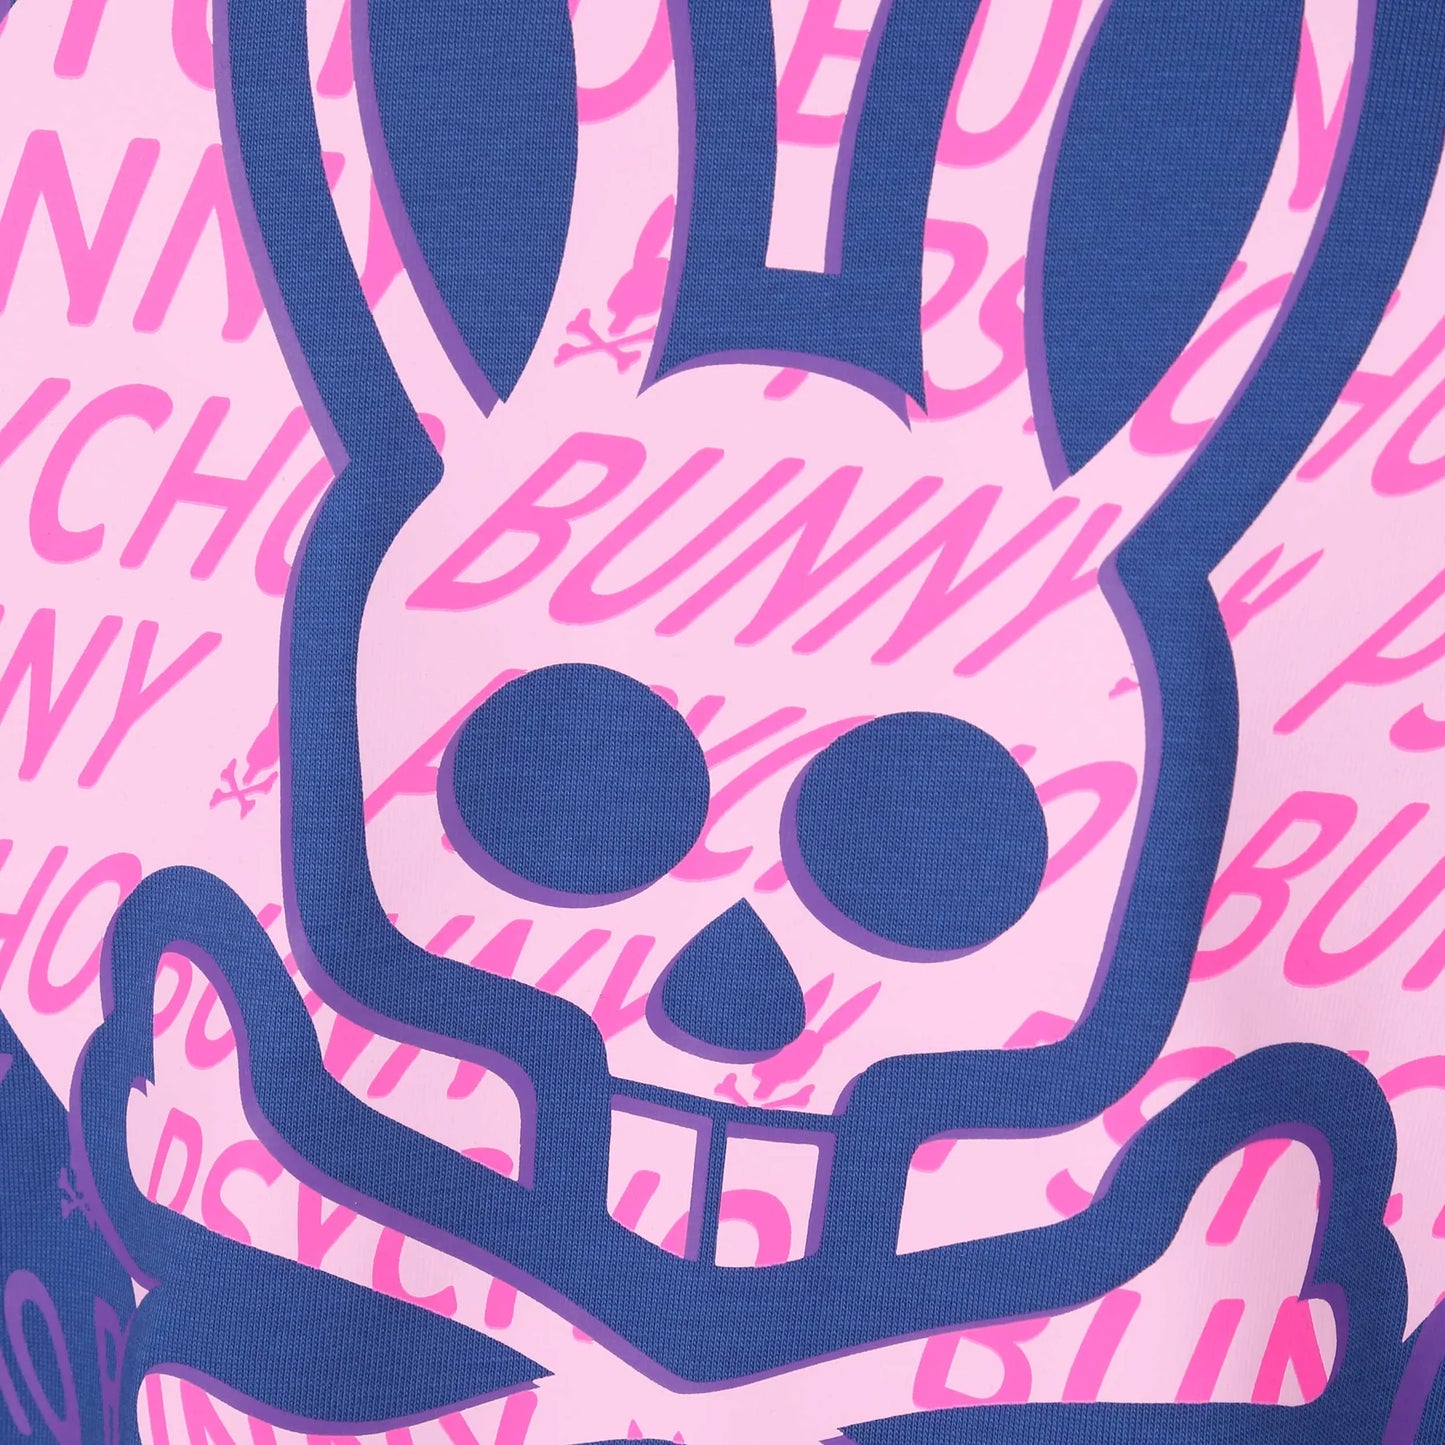 Psycho Bunny-Bengal graphic tee in Space blue